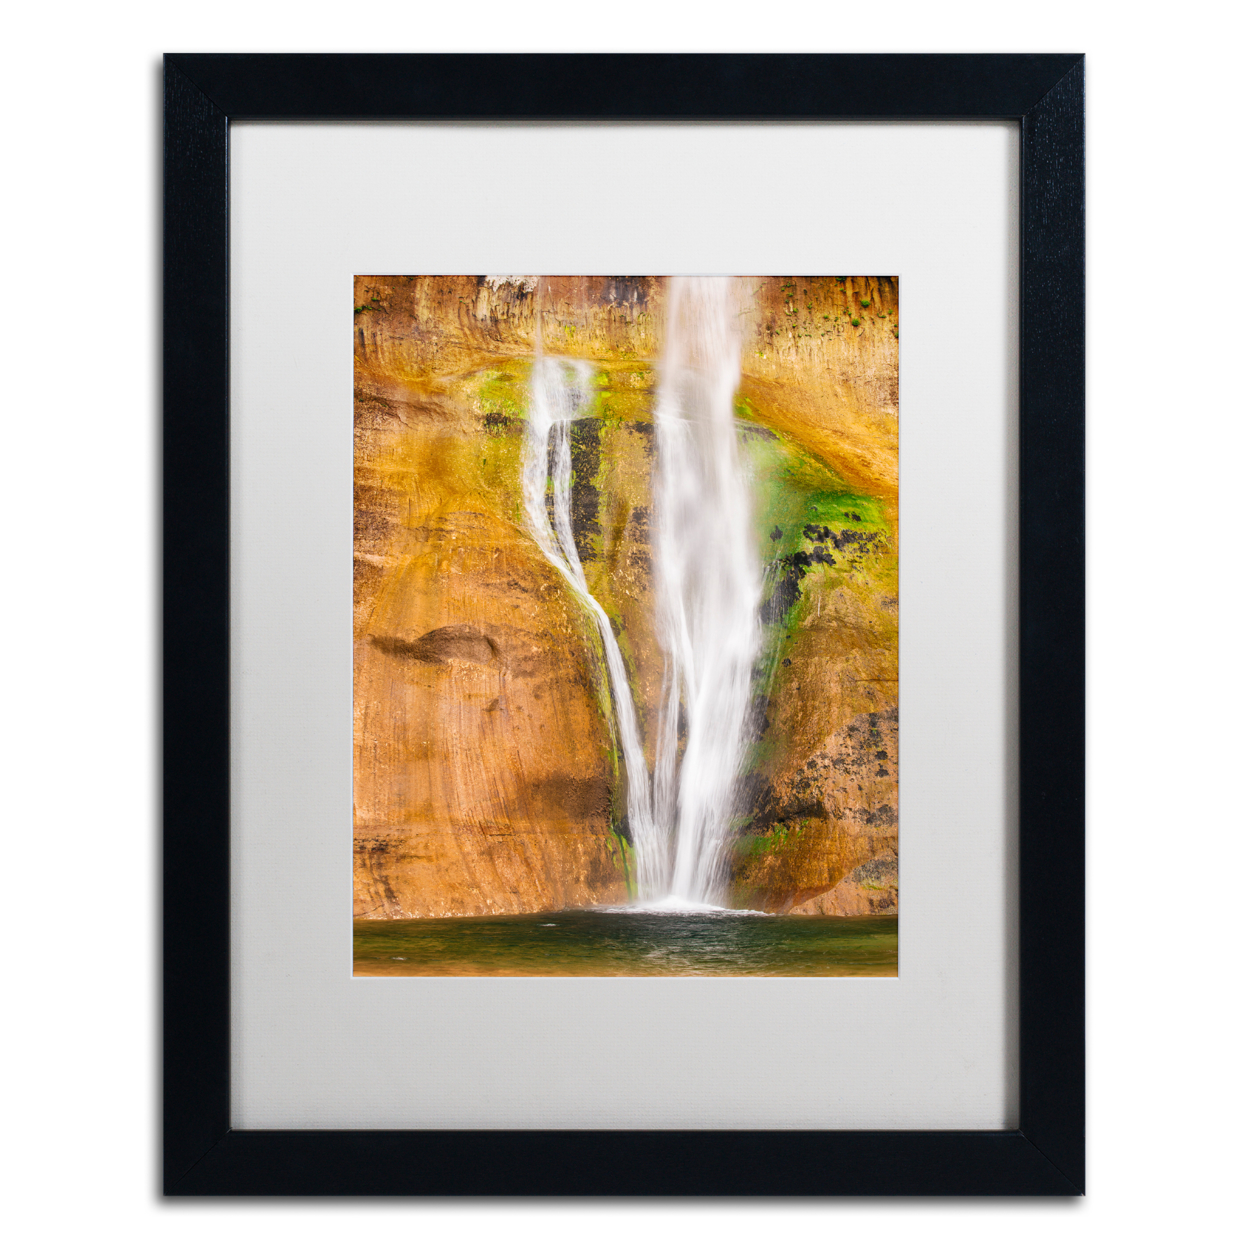 Michael Blanchette Photography 'Ribbons' Black Wooden Framed Art 18 X 22 Inches